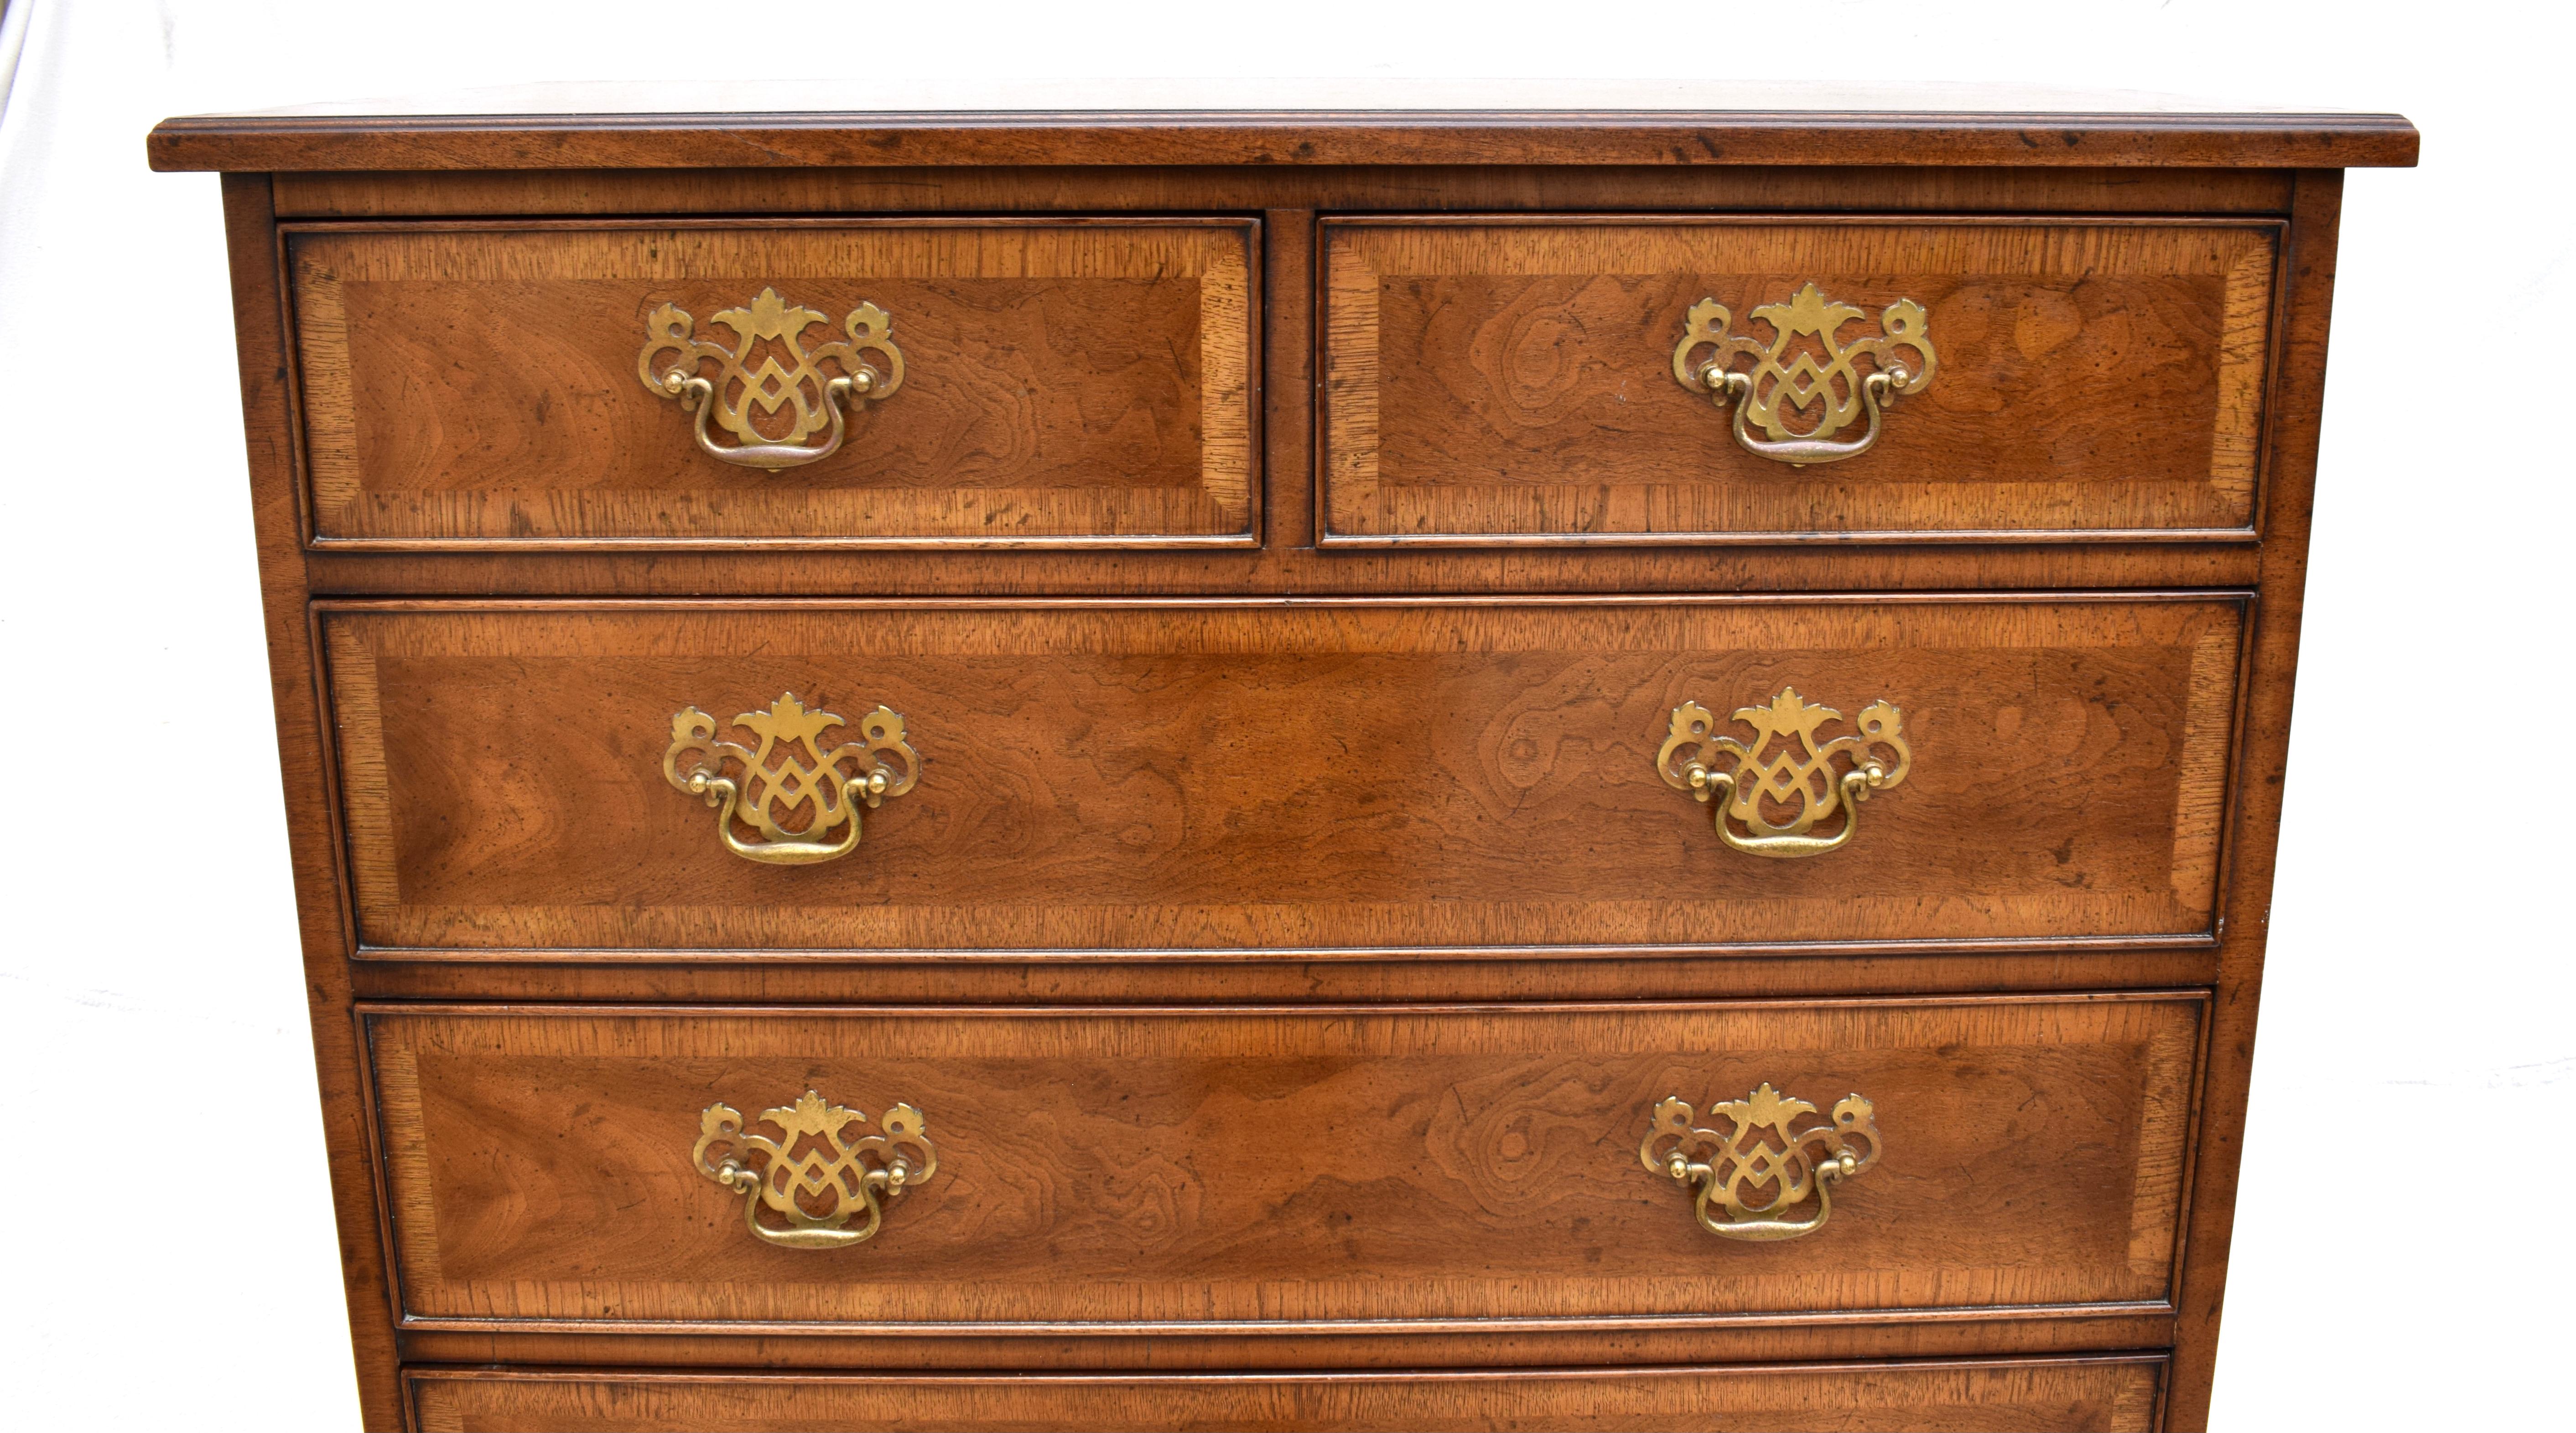 Mid-20th century, Mahogany, Henredon upright chest of drawers having banded and herringbone inlaid borders, seven cockbeaded drawers on straight bracket feet. Beautifully maintained all original finish & hardware. Heirloom quality, branded.